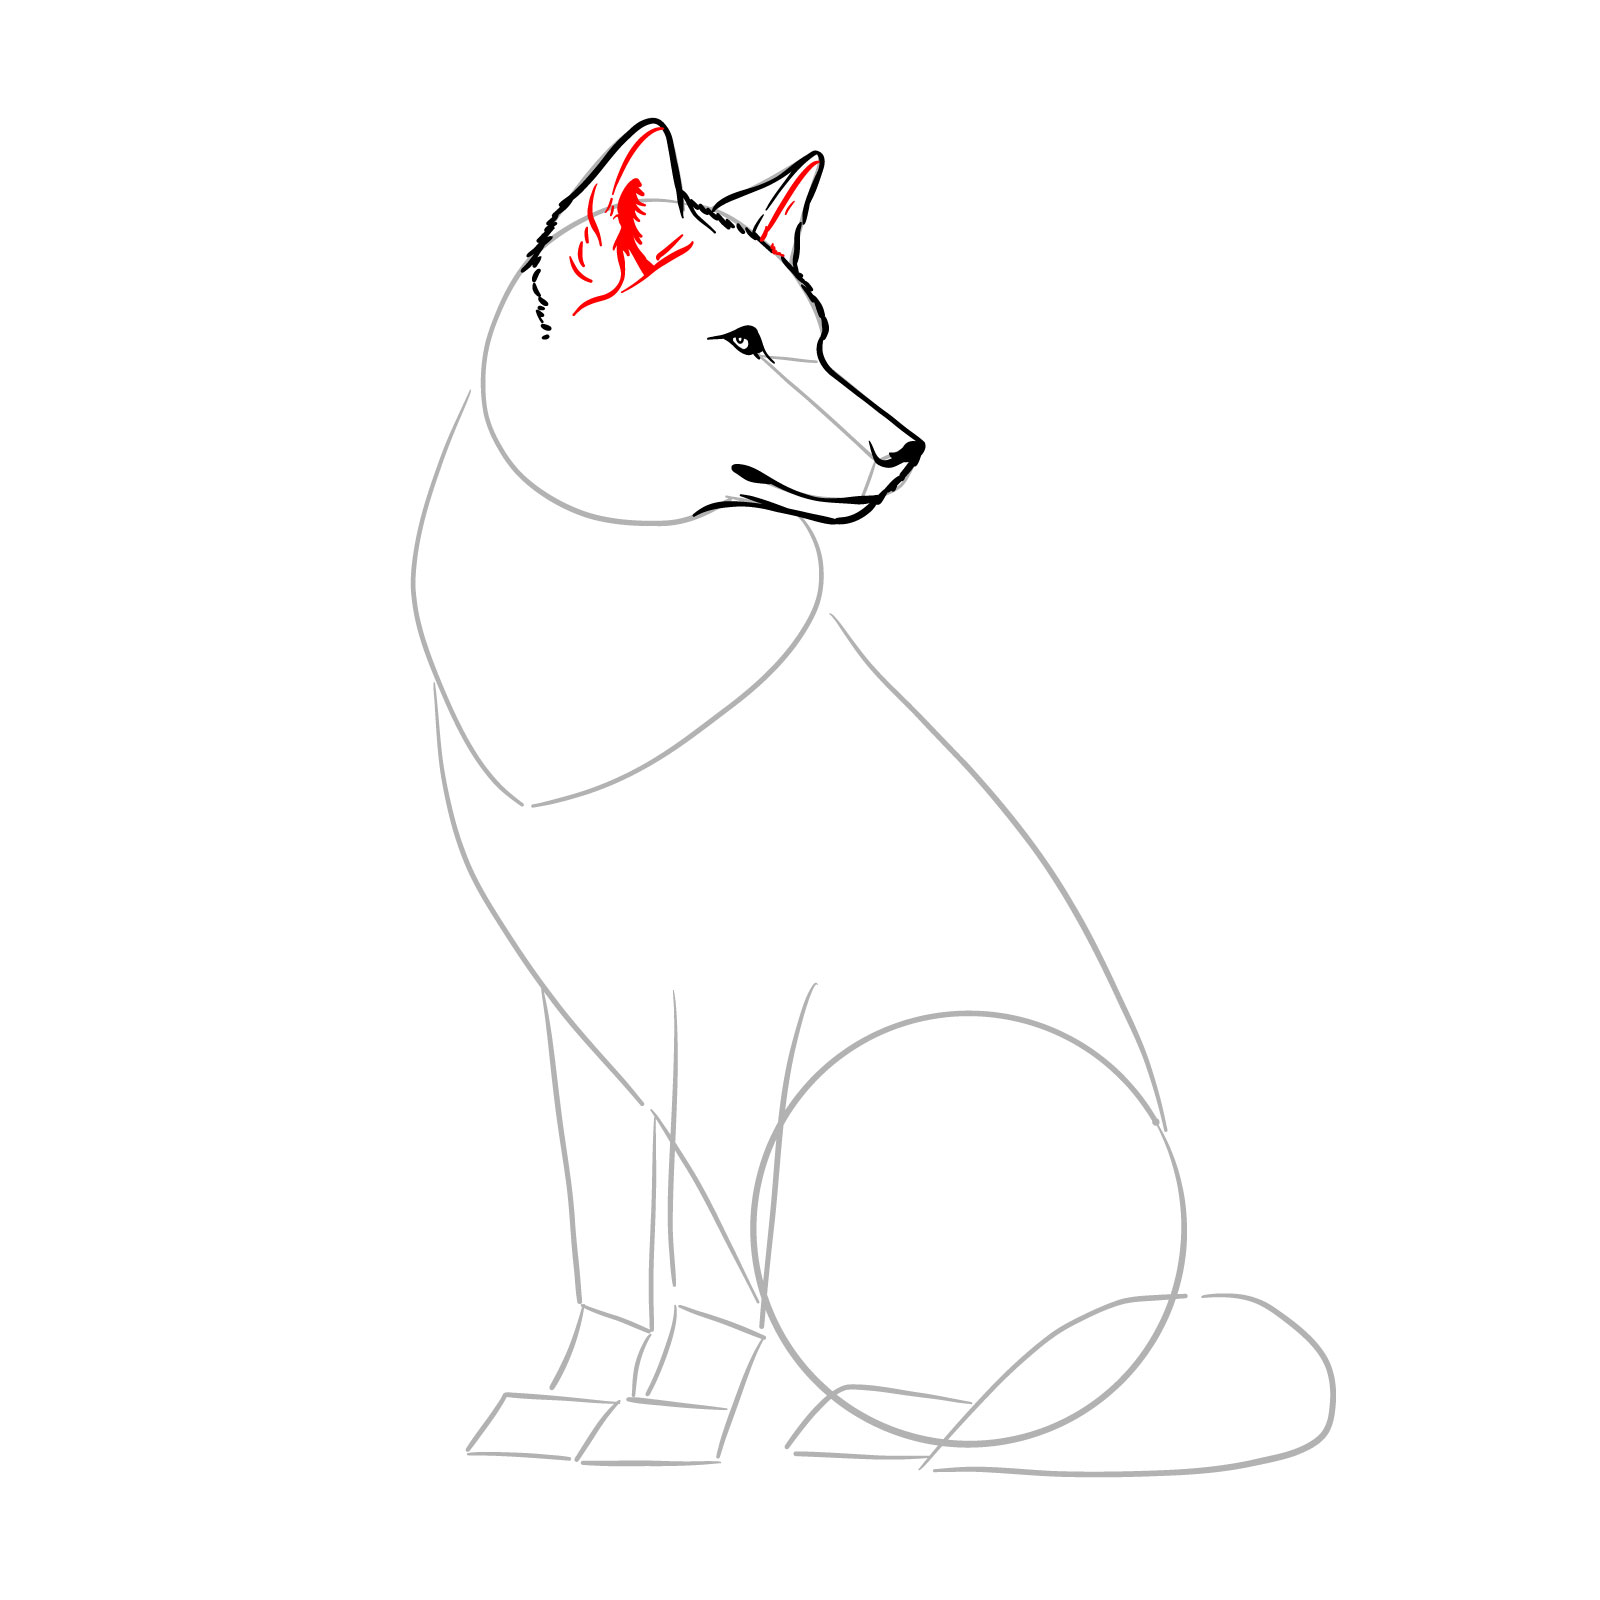 Detailing the ears of a sitting wolf in a drawing - step 08